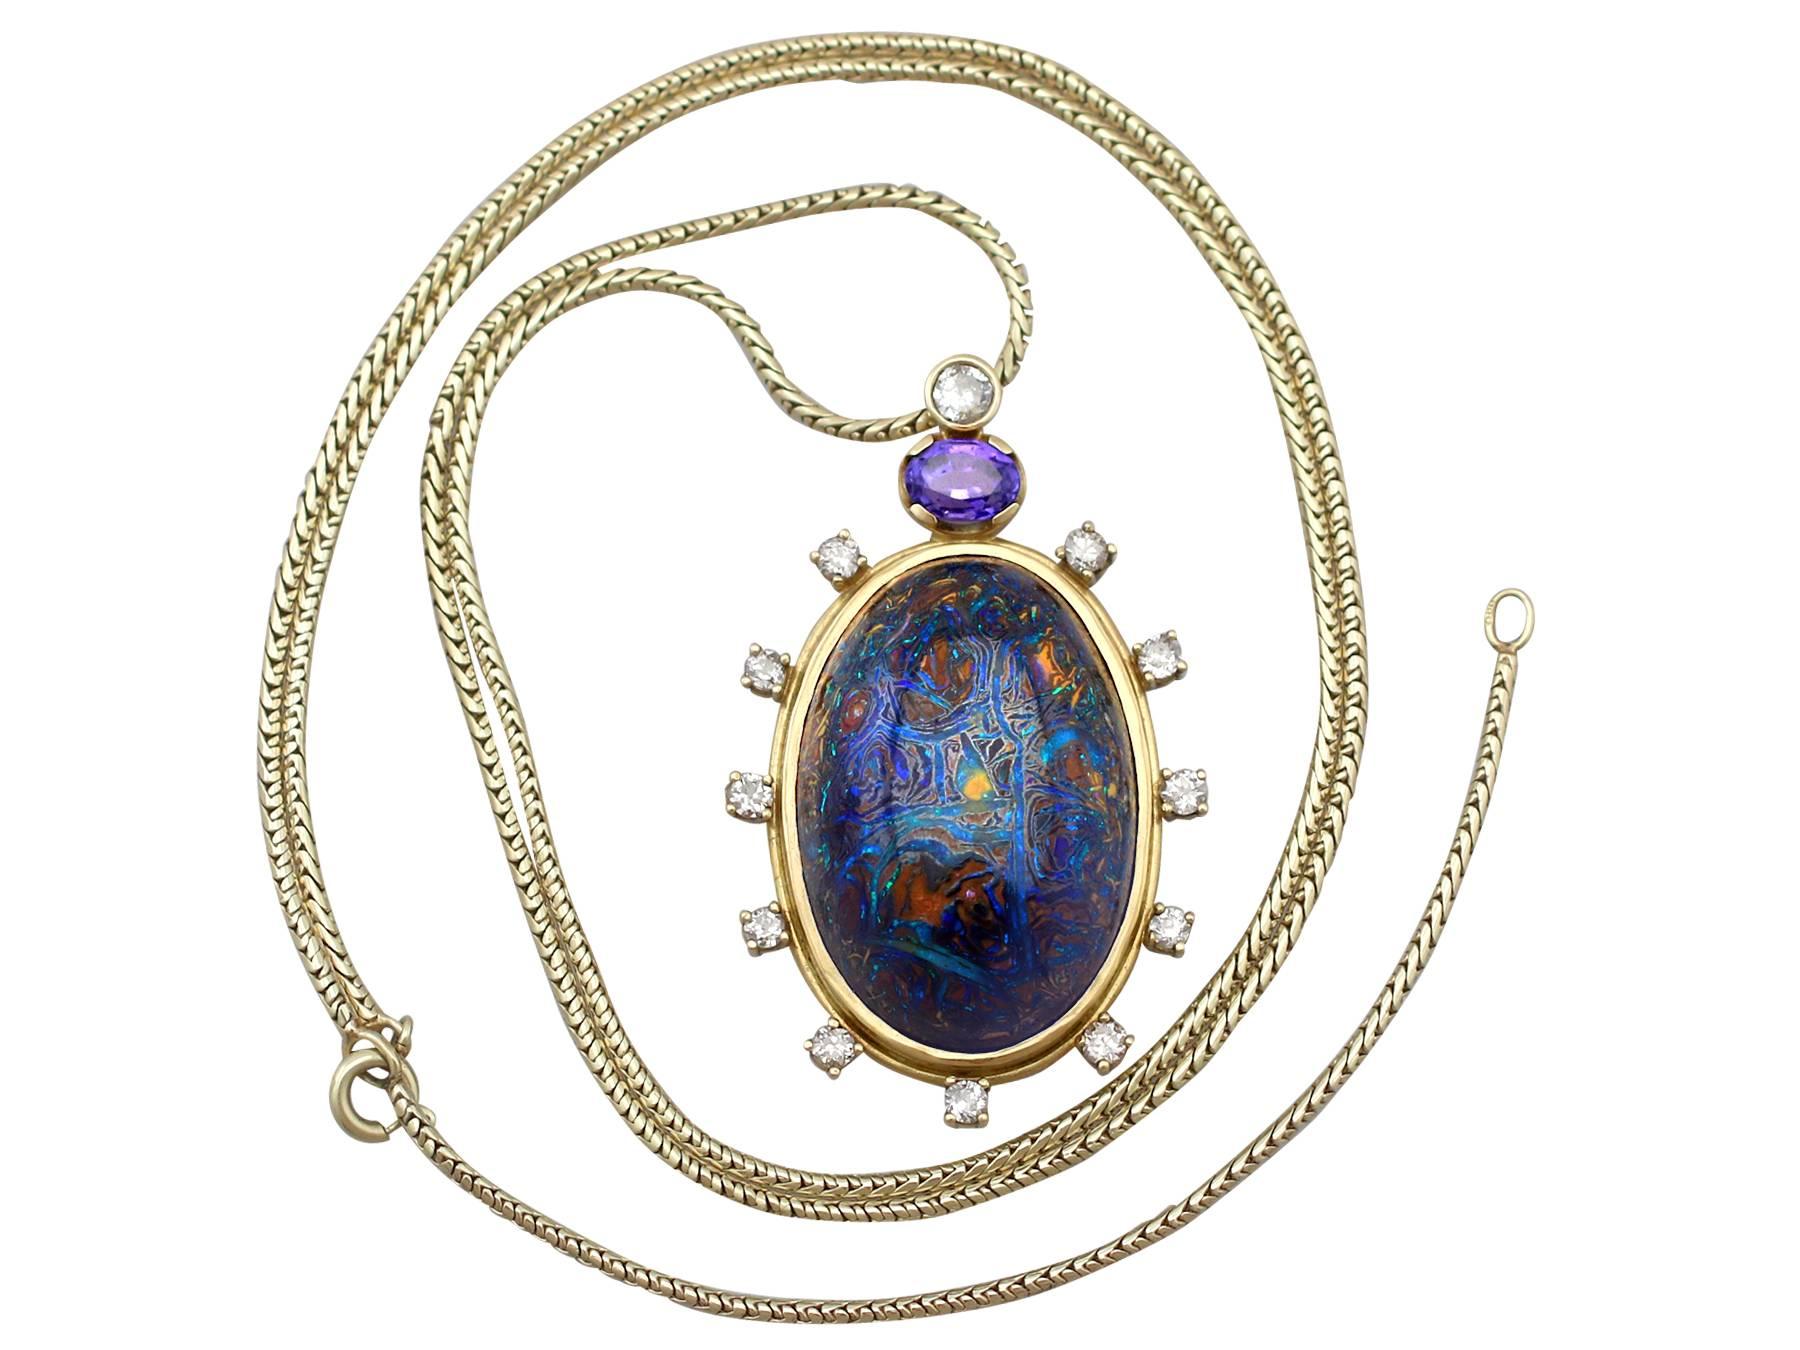 This exceptional and stunning boulder opal pendant has been crafted in 18k yellow gold.

The German-made pendant has an oval form displaying a stunning central cabochon cut boulder opal encircled by a stepped plain 18k yellow gold frame.

The